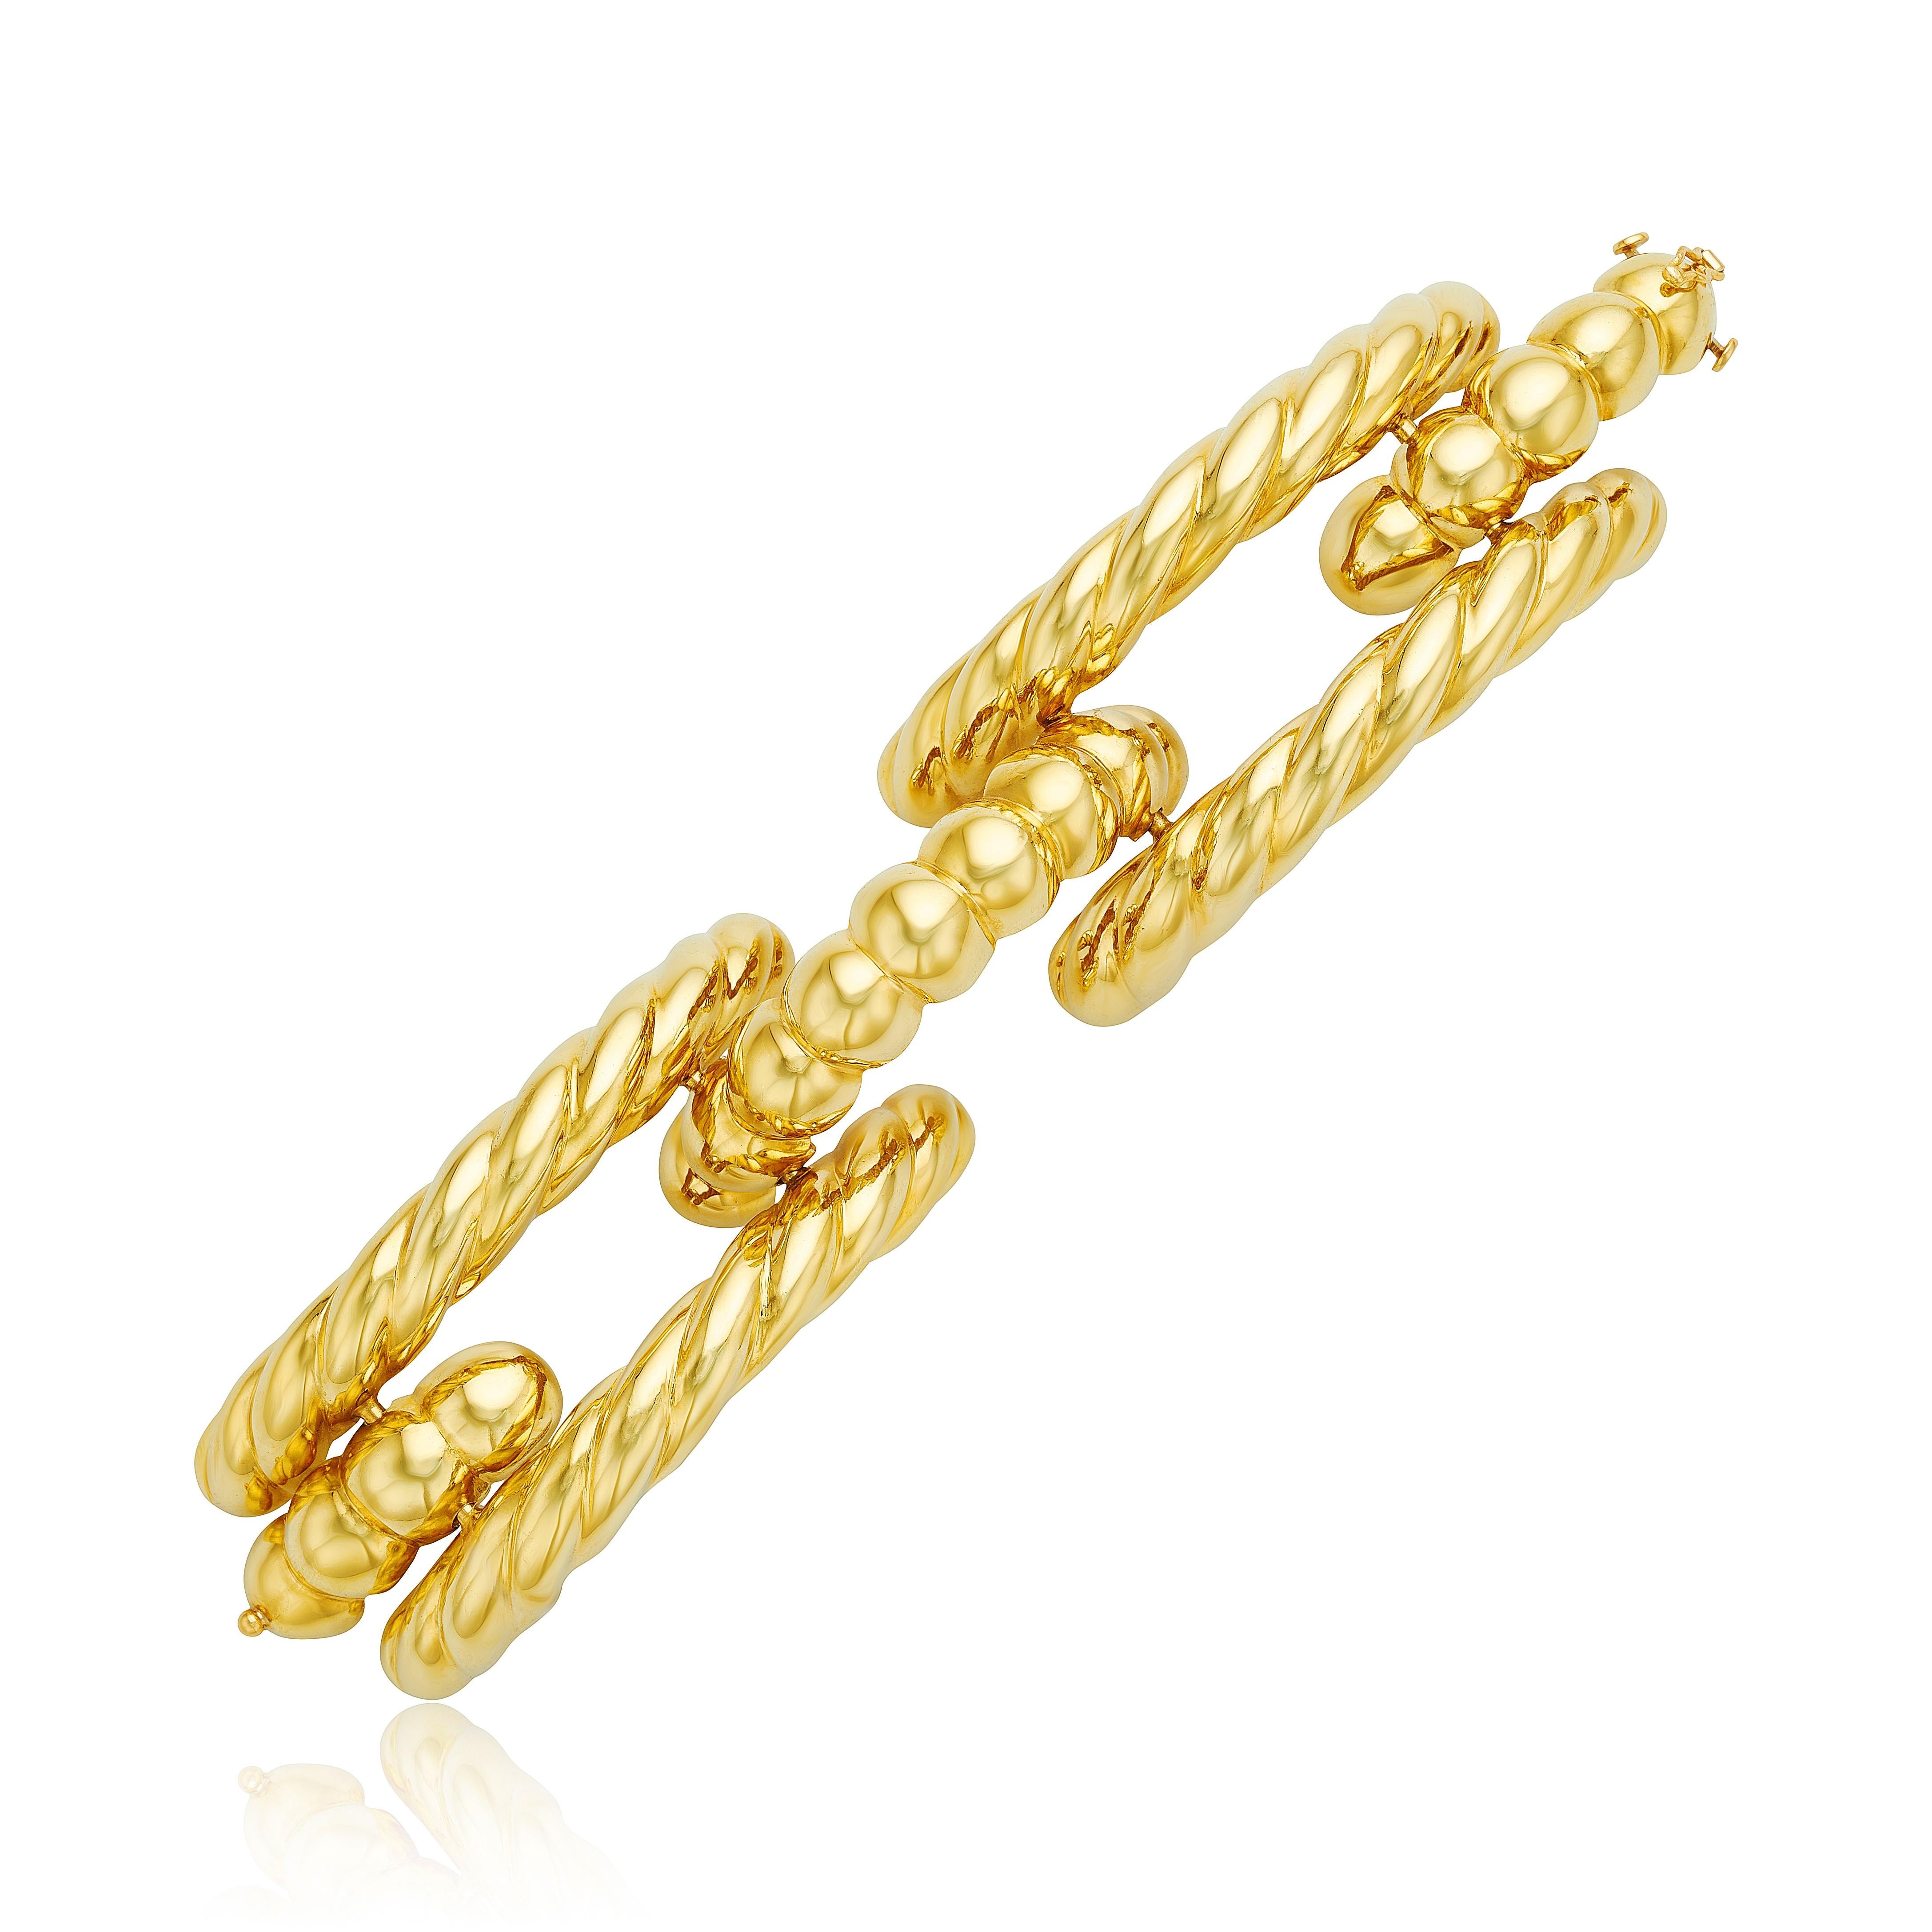 With an intricate robe texture design, this 18 karat yellow gold bar bracelet is unique in its three tier design that leaves a slight opening in the middle. 